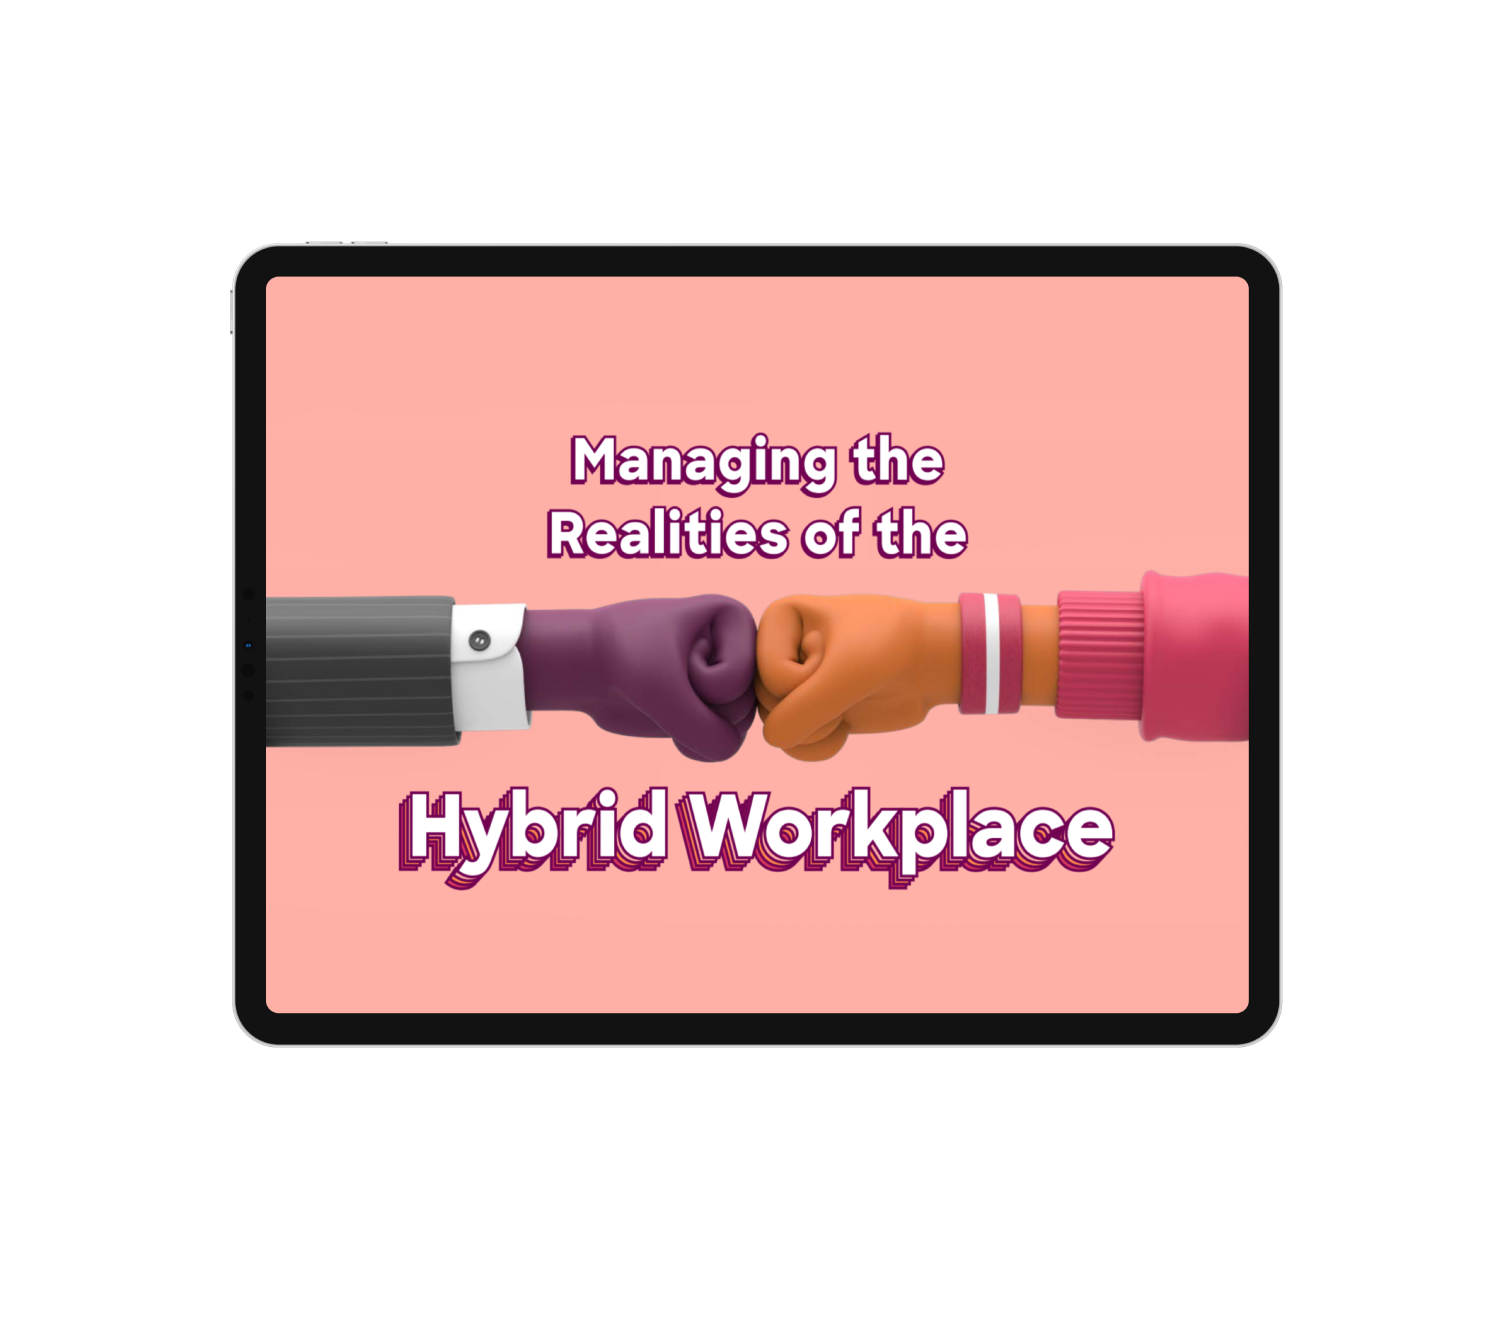 US_Managing-the-Realities-of-the-Hybrid-Workplace